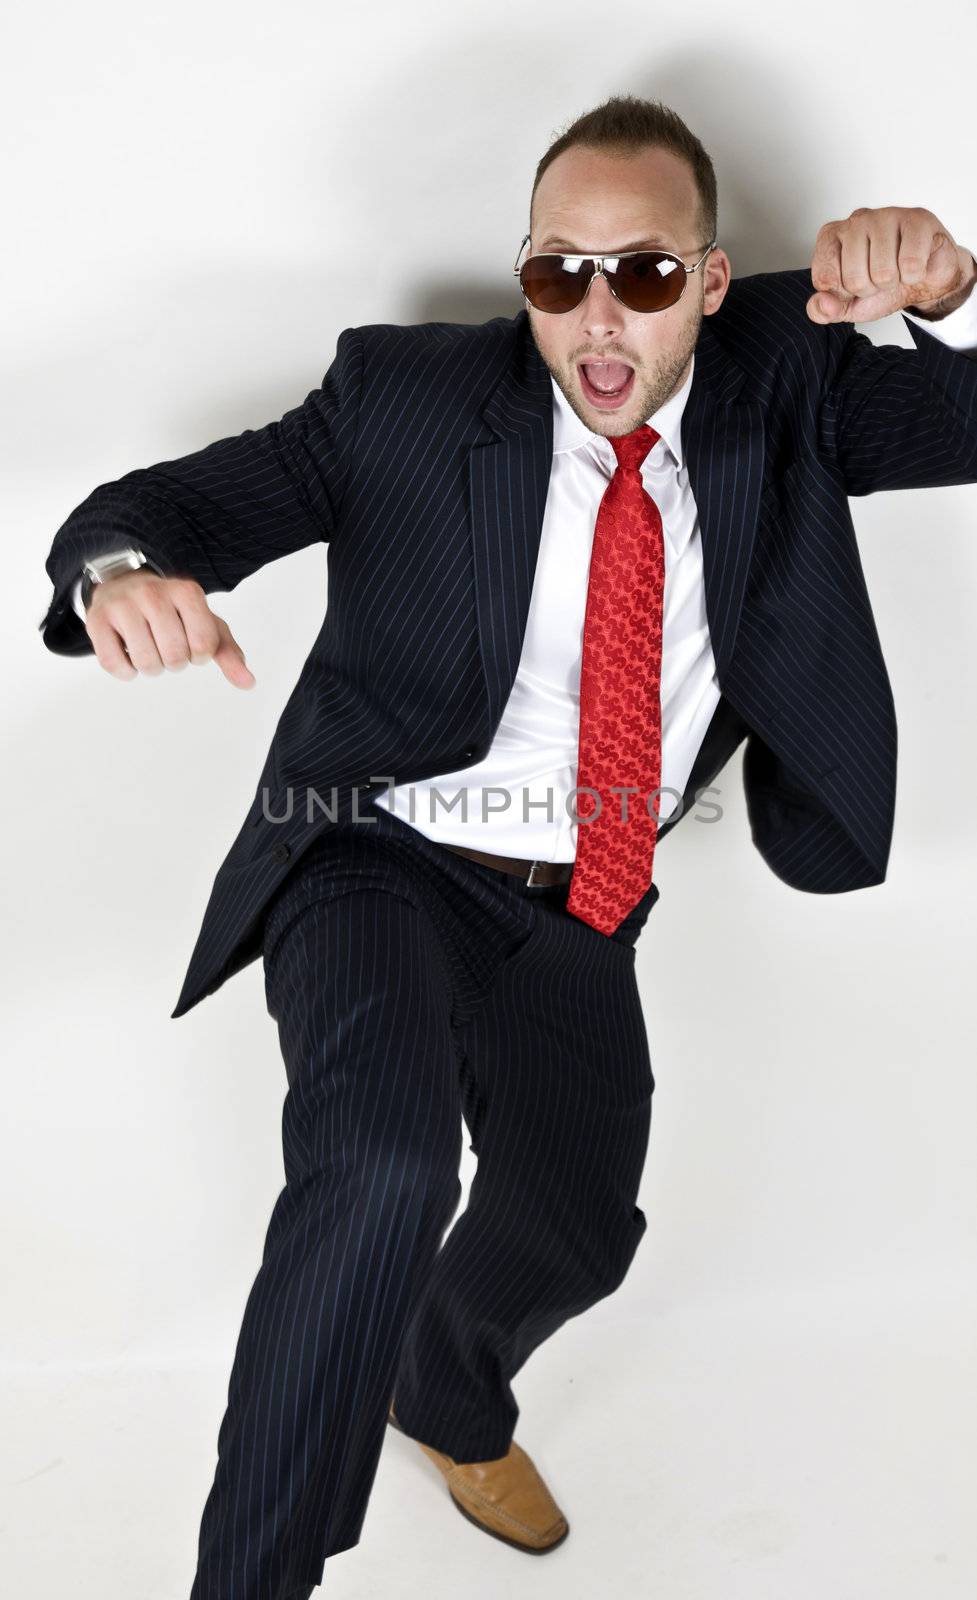 dancing man on isolated background
